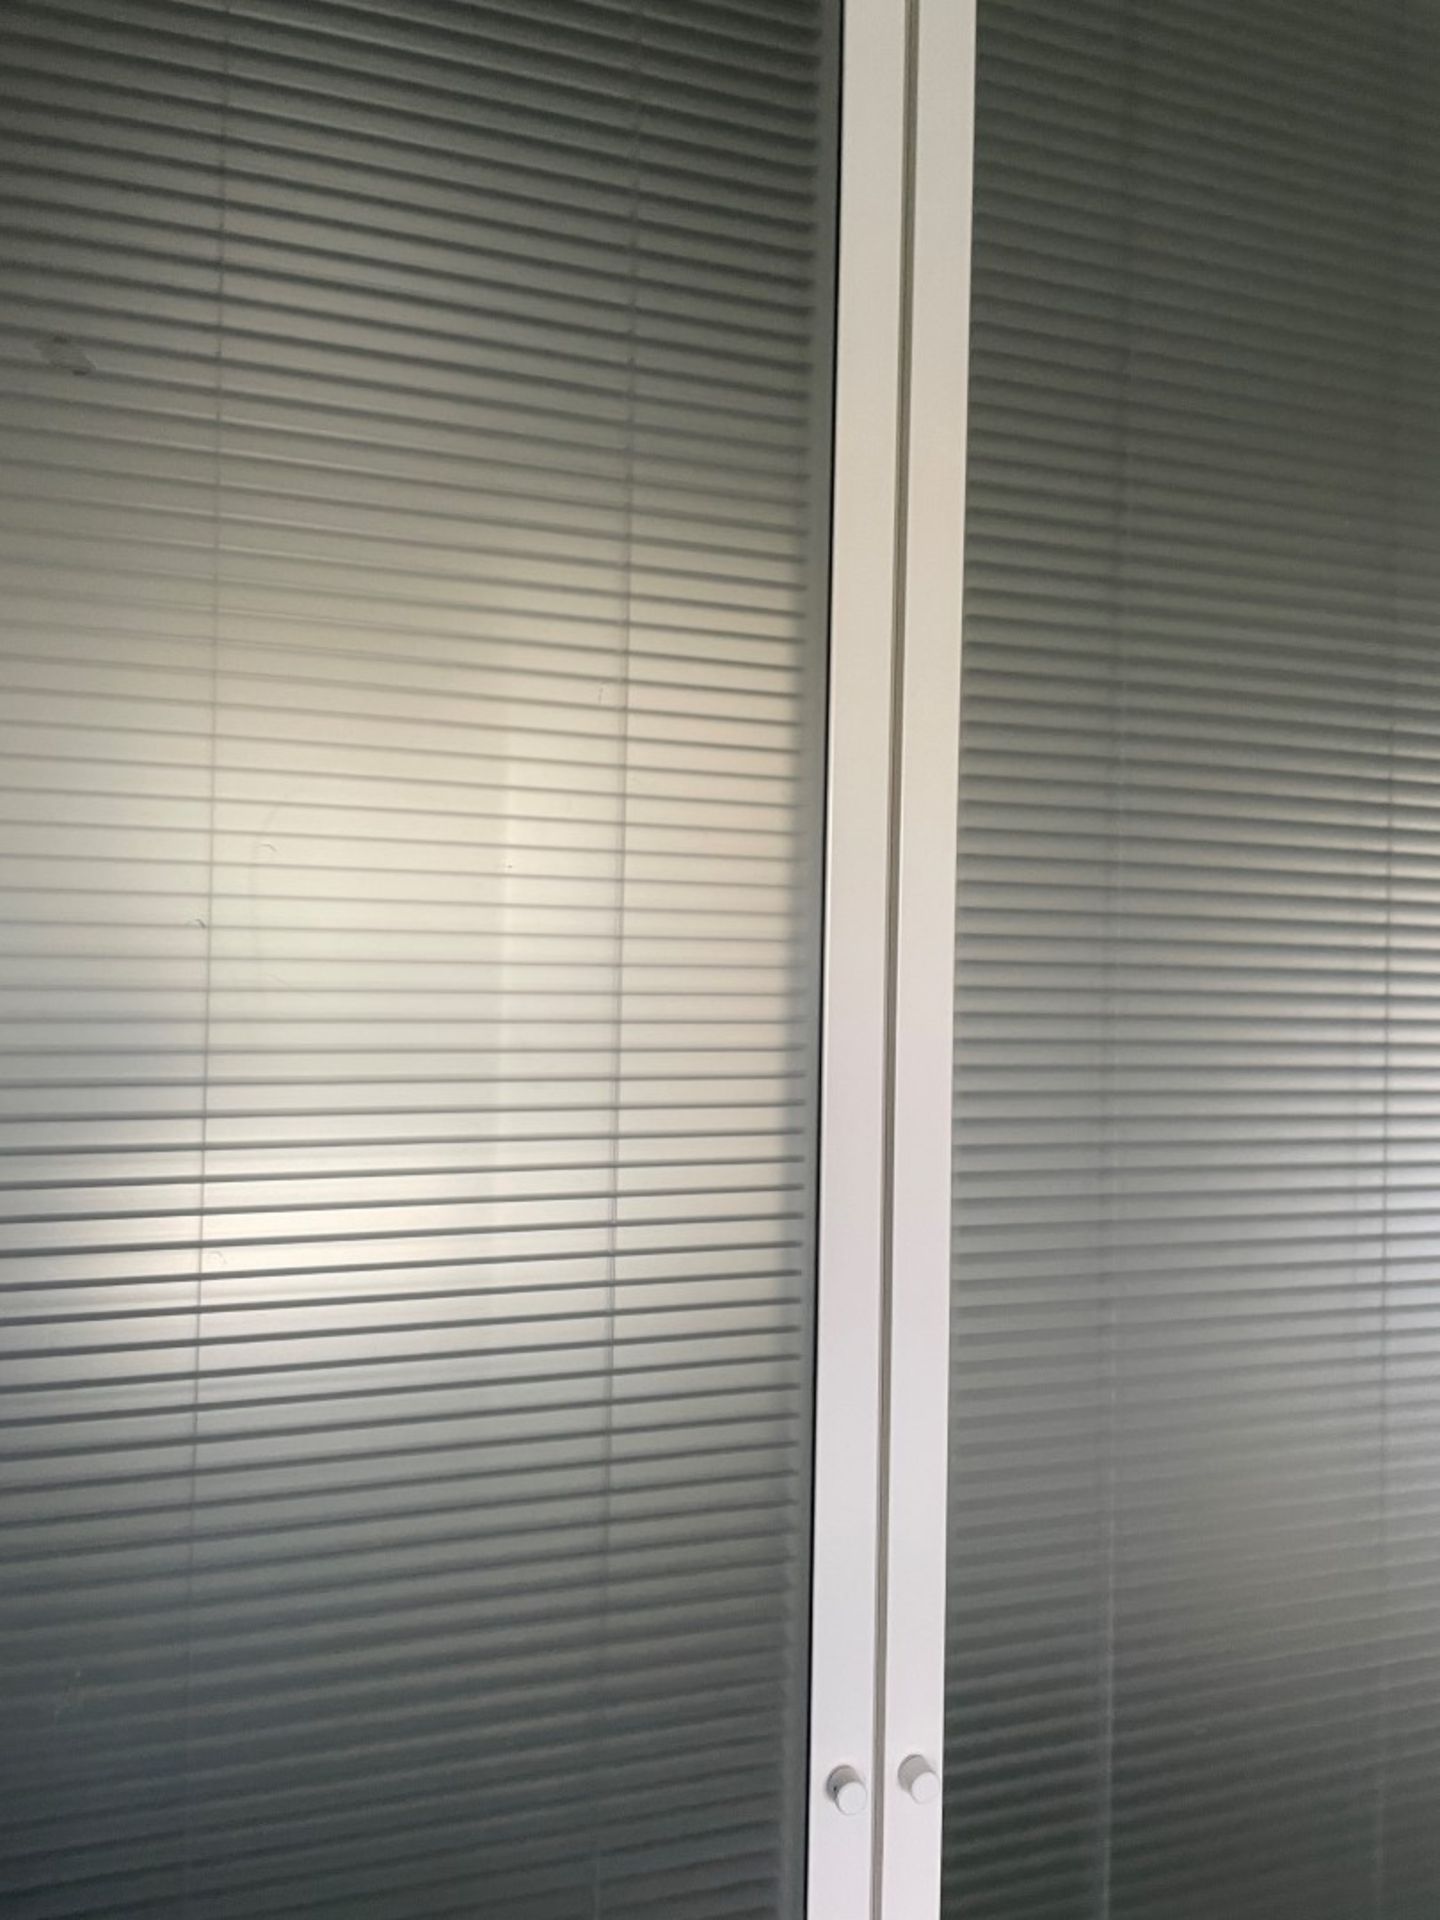 6 x Partition Panels - Includes 4 x Glazed With Privacy Blinds And 2 x Slim Solid White Panels - - Image 4 of 9